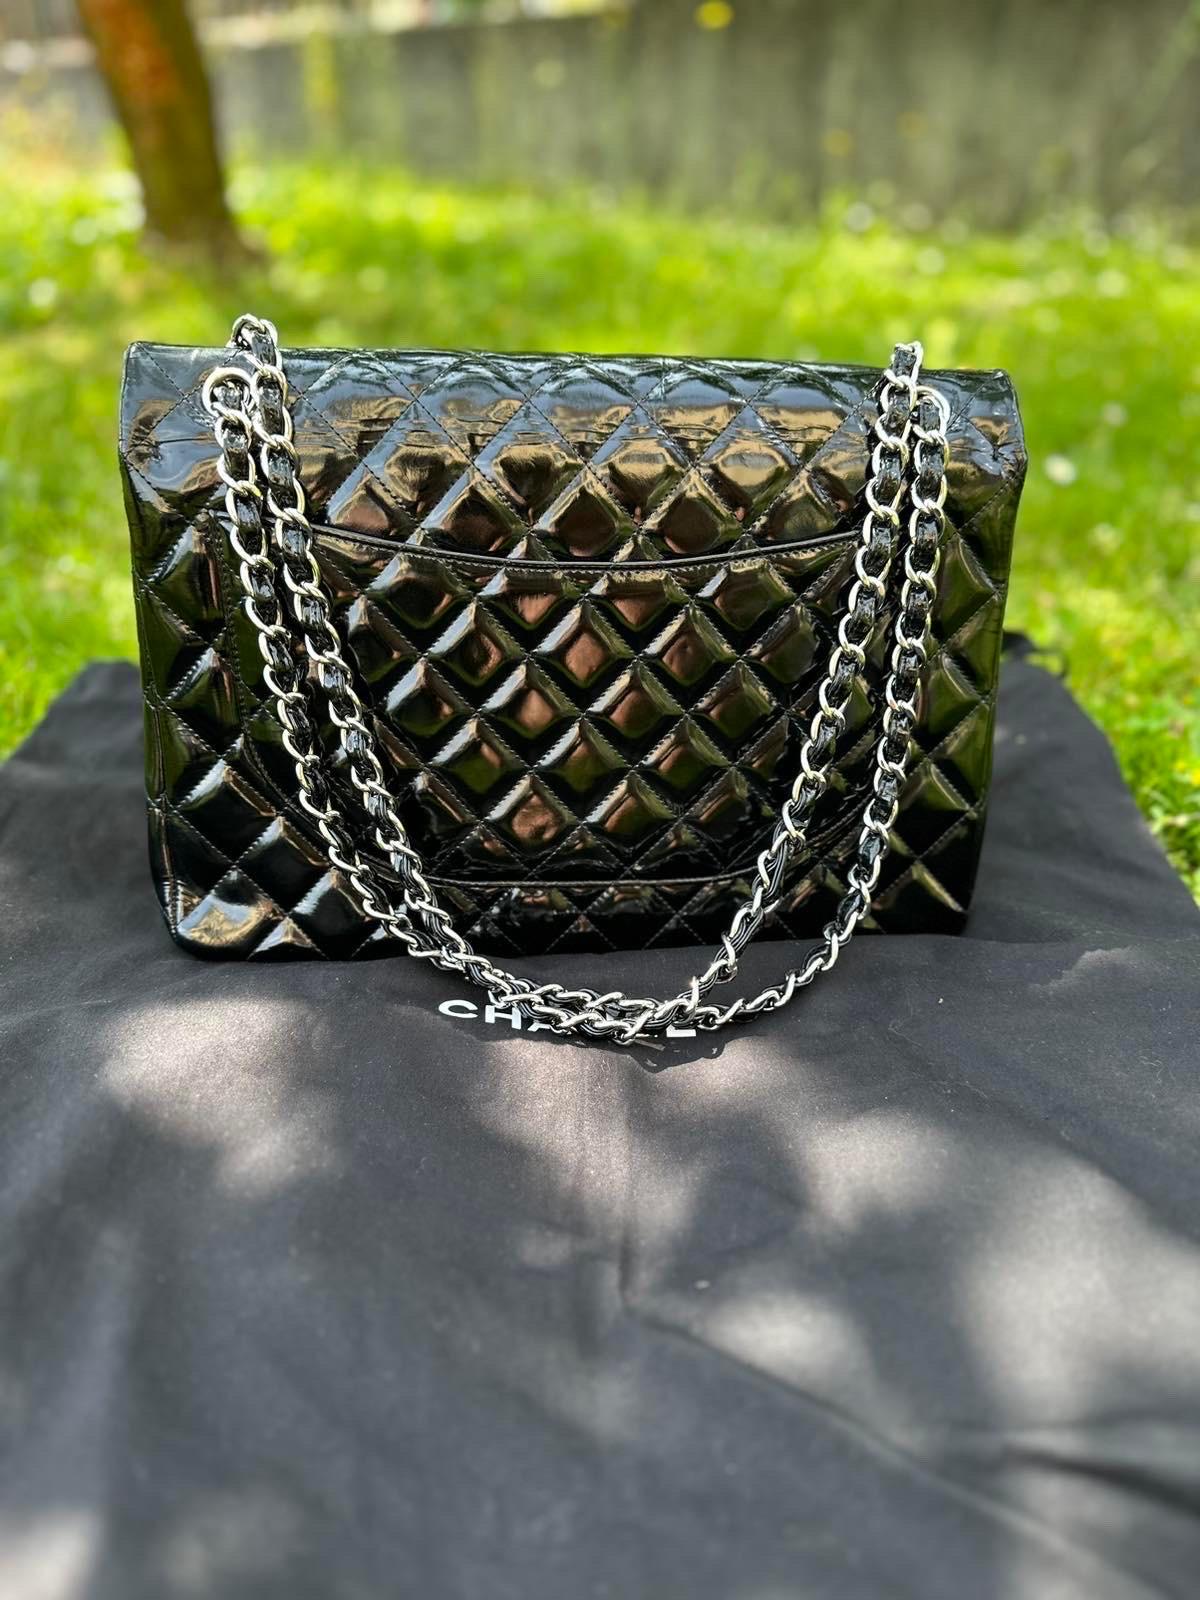 CHANEL Timeless Classic Black Double Flap Maxi Bag 1